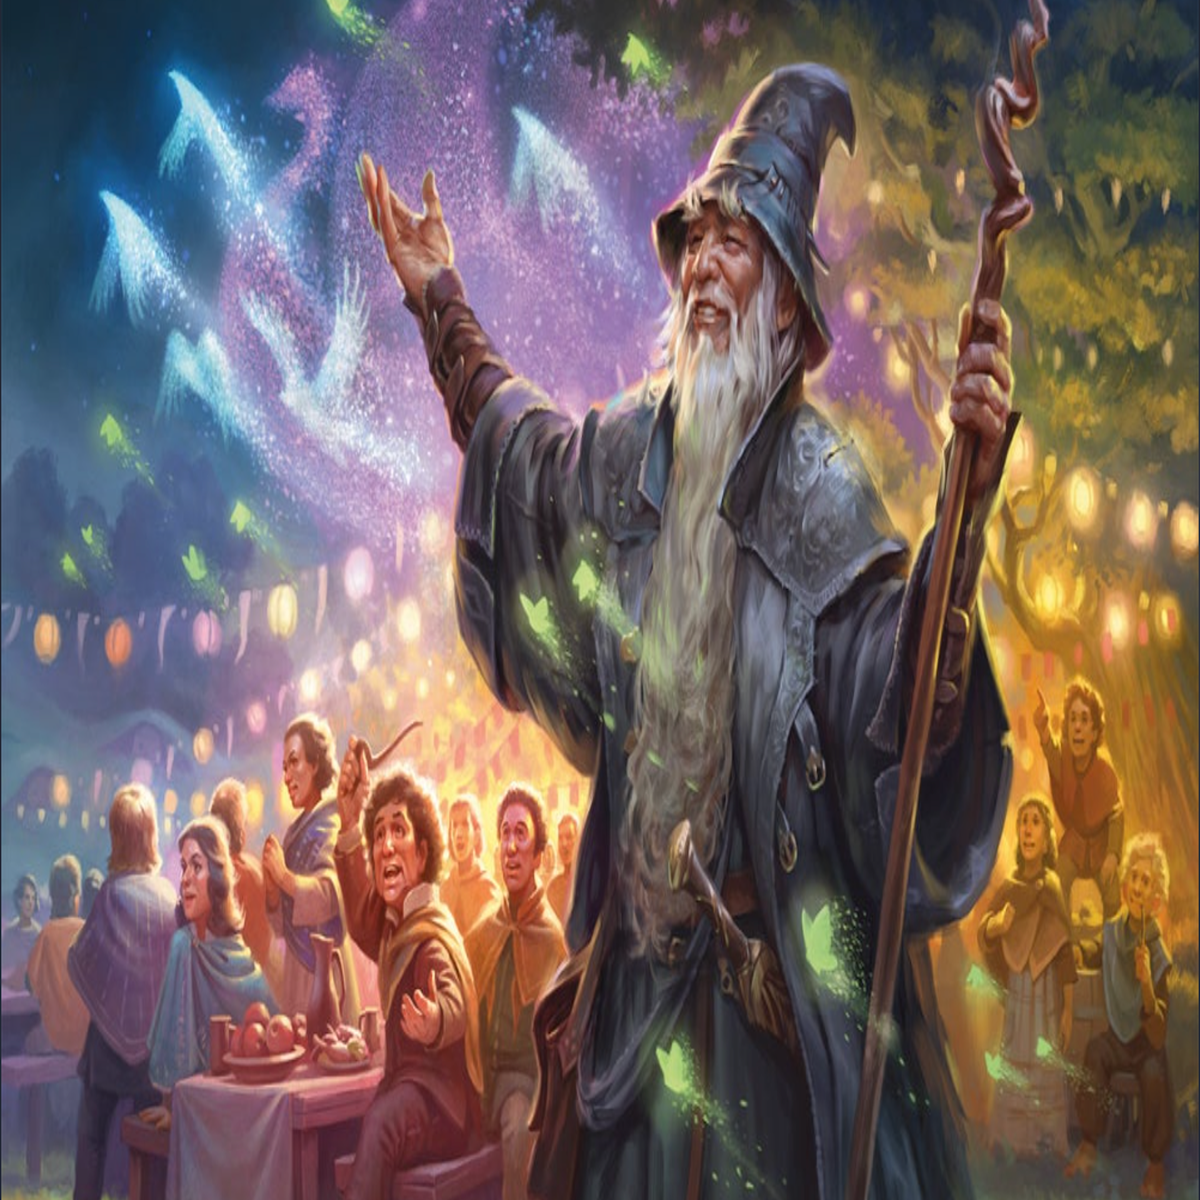 Lord of the Rings comes to Magic: The Gathering with Epic Reveal